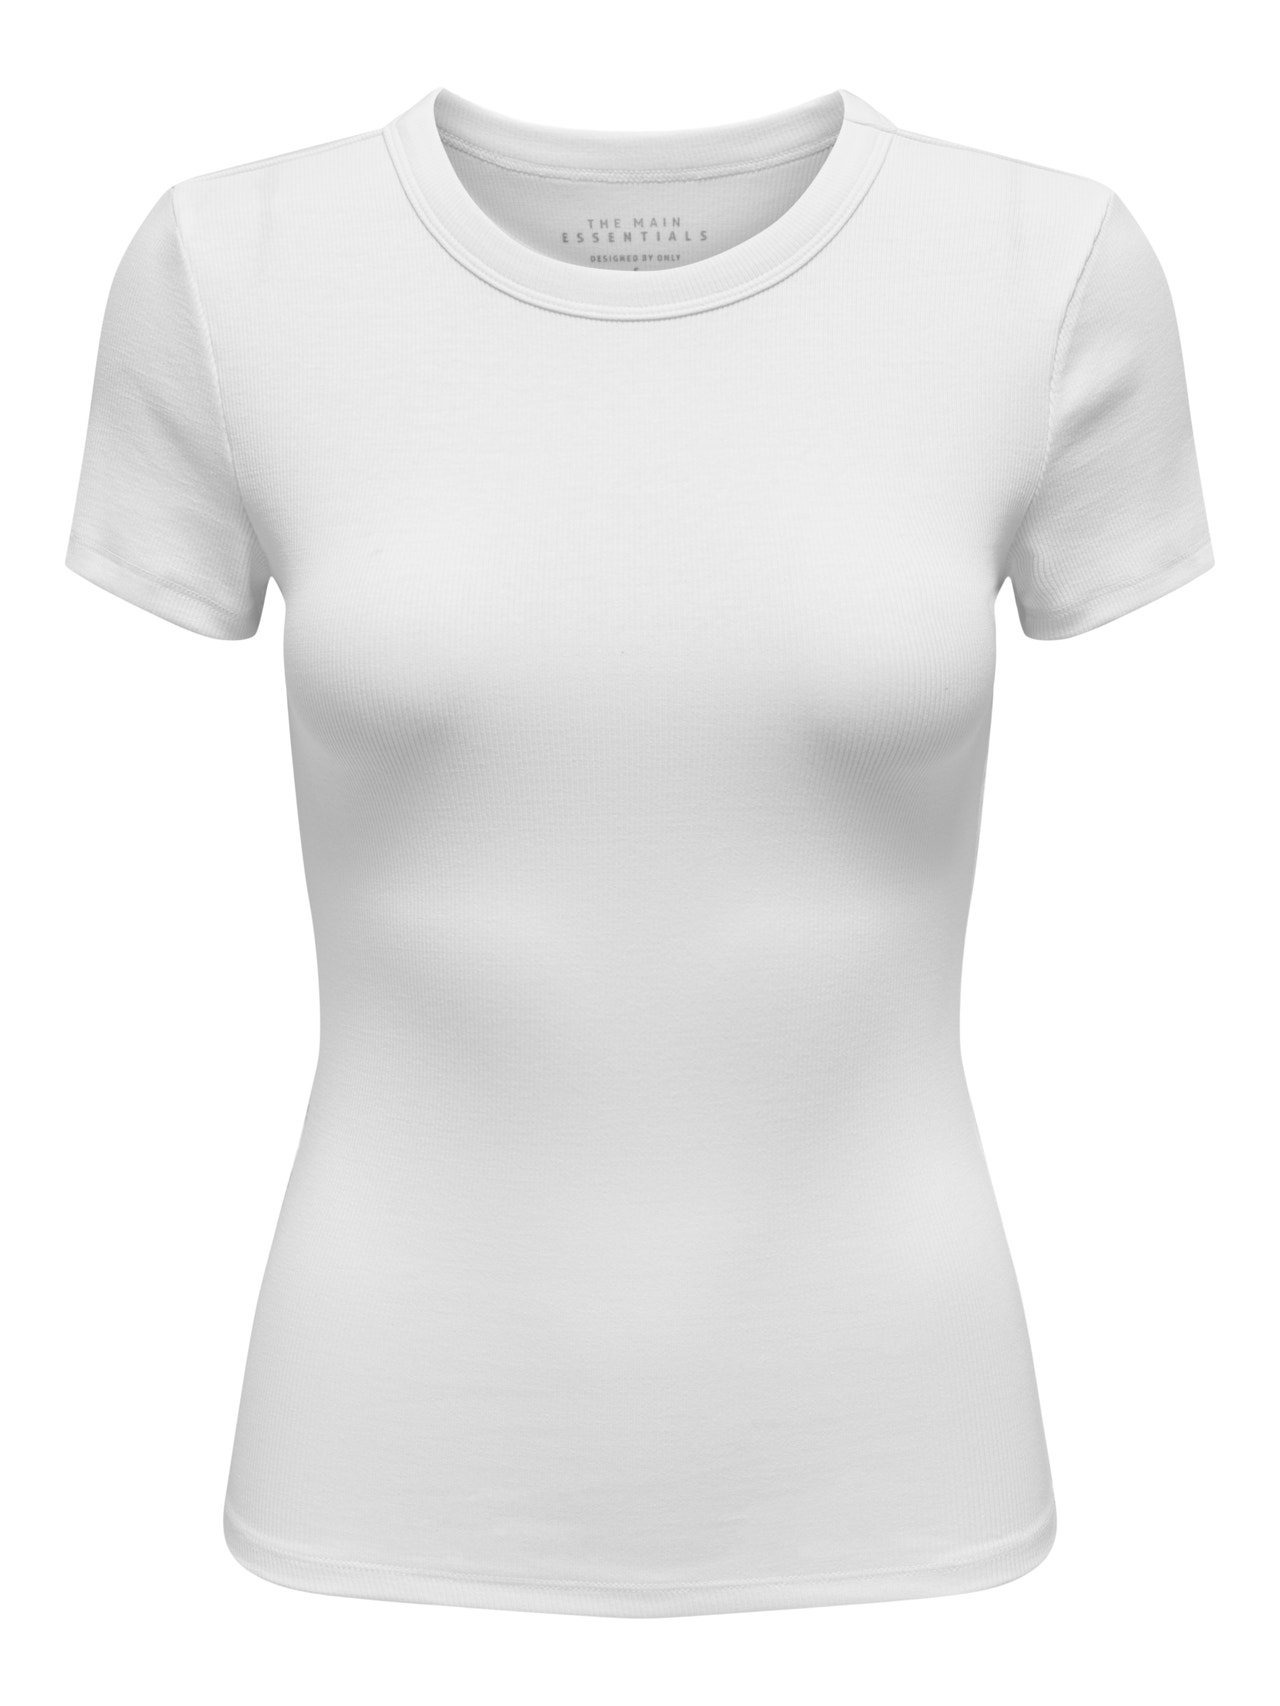 ONLY Regular Fit Round Neck Top -Bright White - 15330639